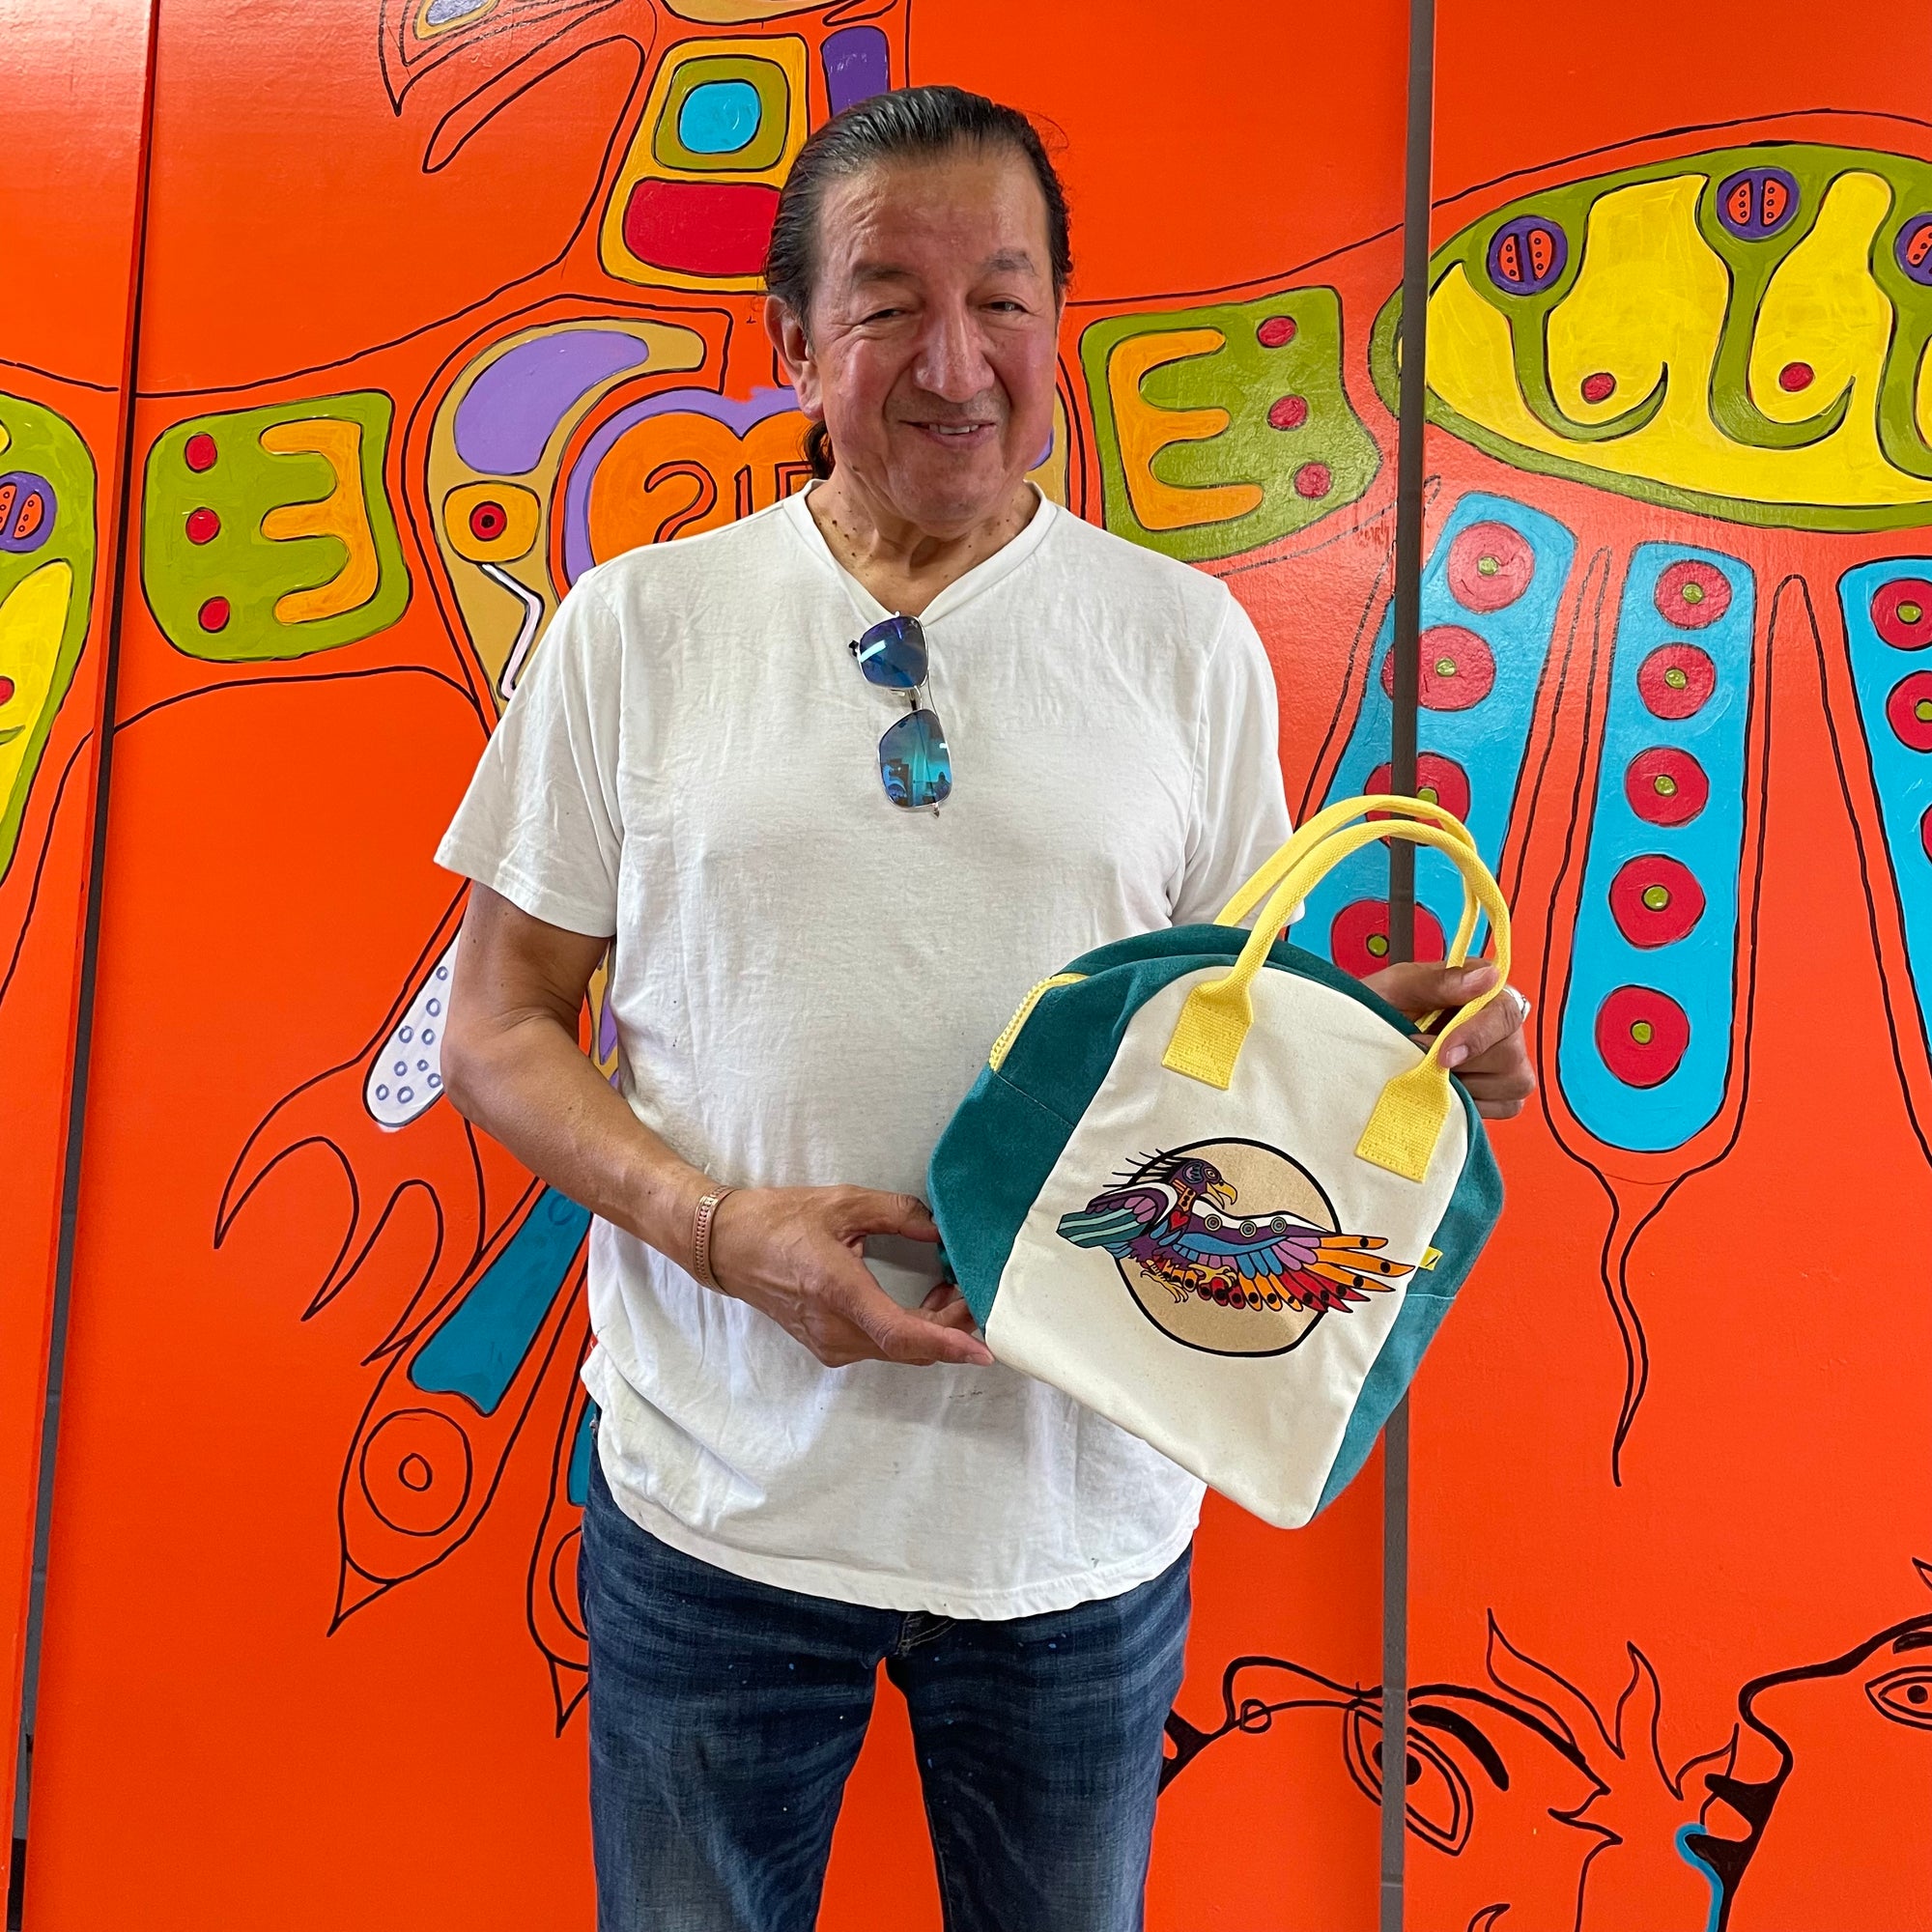 Photo of Philip Cote holding lunch bag with eagle bright orange background art mural